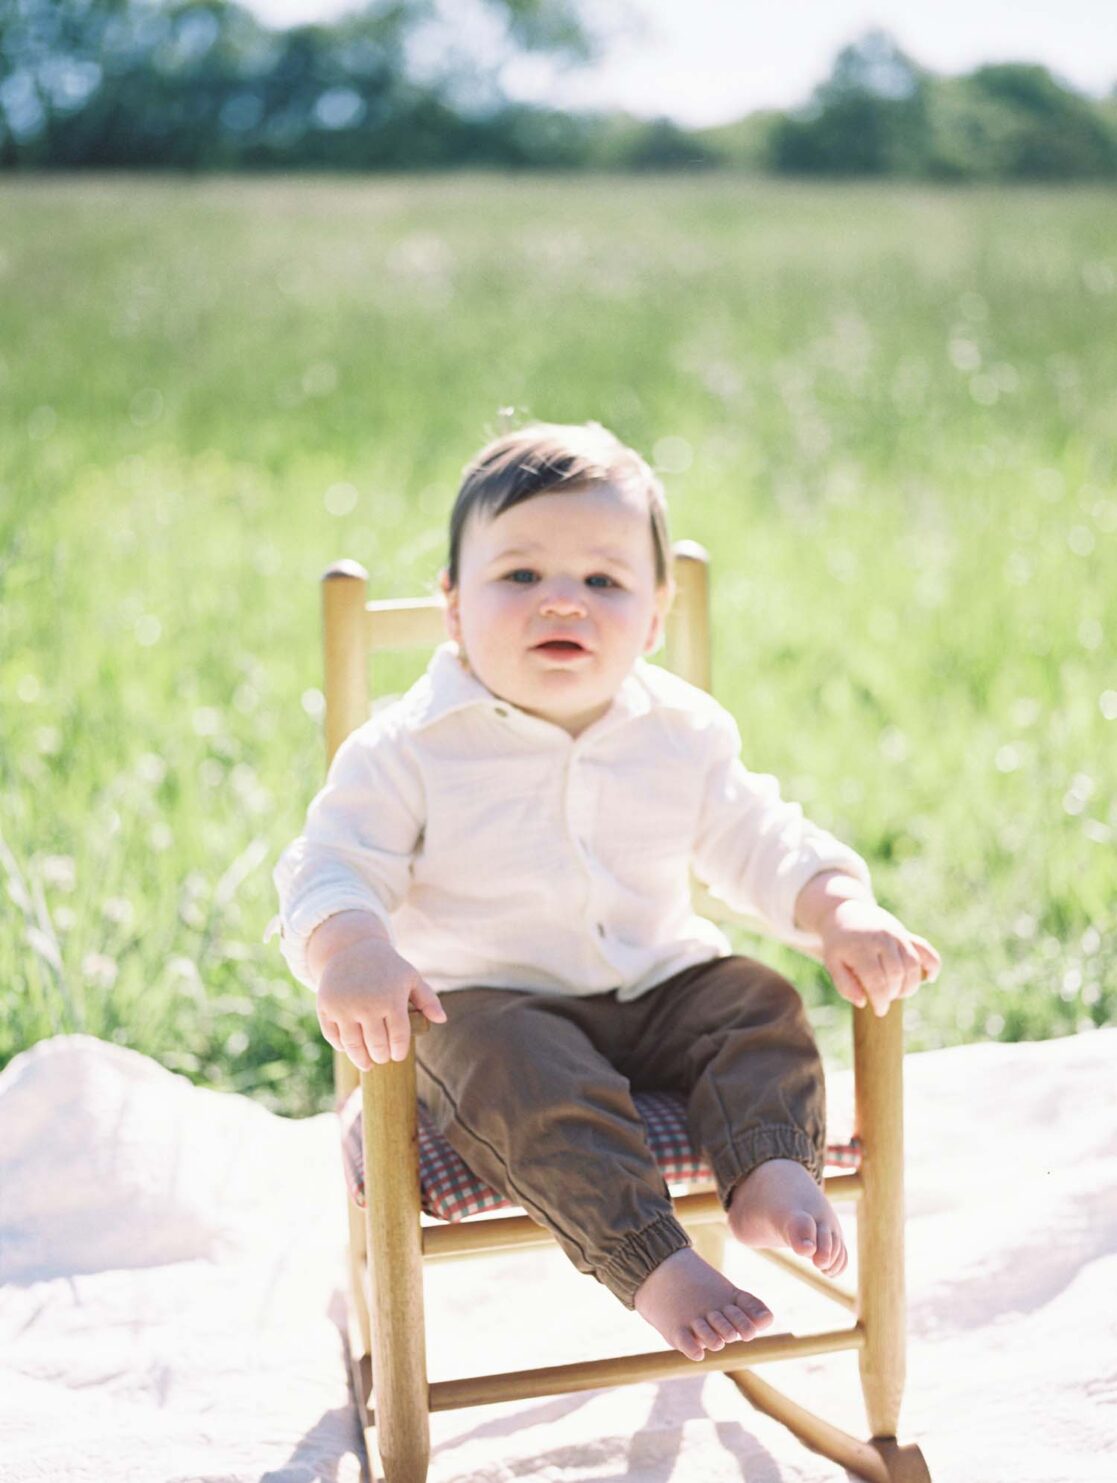 Photo one year old baby boy sitting in a rocking chair in a grassy field by Richmond baby photographer Jacqueline Aimee Portraits